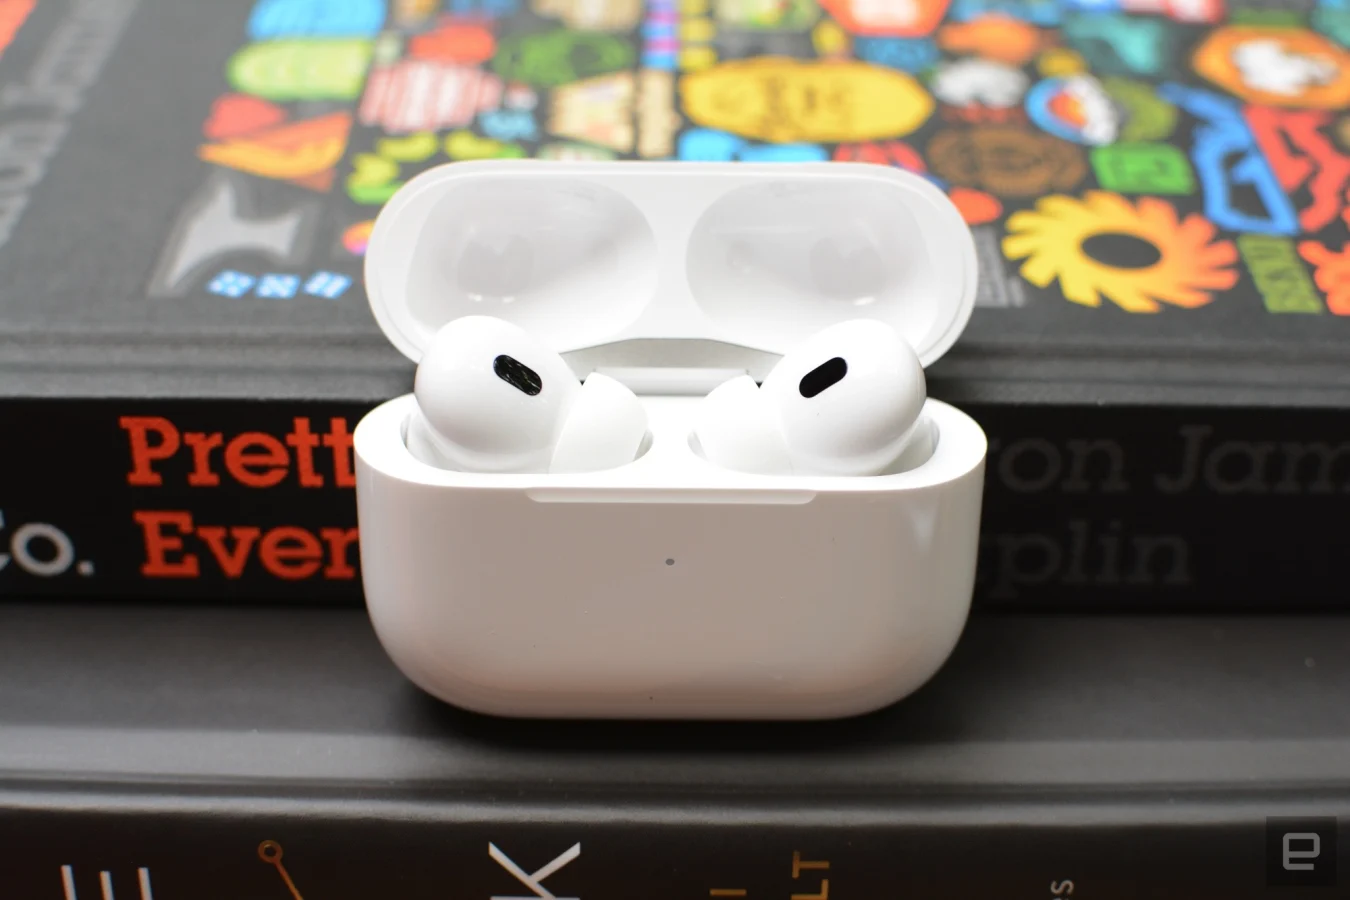 Despite the unchanged design, Apple has included a variety of updates to the new AirPods Pro. All the comforts of the 2019 model are here too, along with additions like Adaptive Transparency, Custom Spatial Audio, and a new touch gesture.  There's room to further refine the familiar formula, but Apple has given iPhone owners several reasons to upgrade.